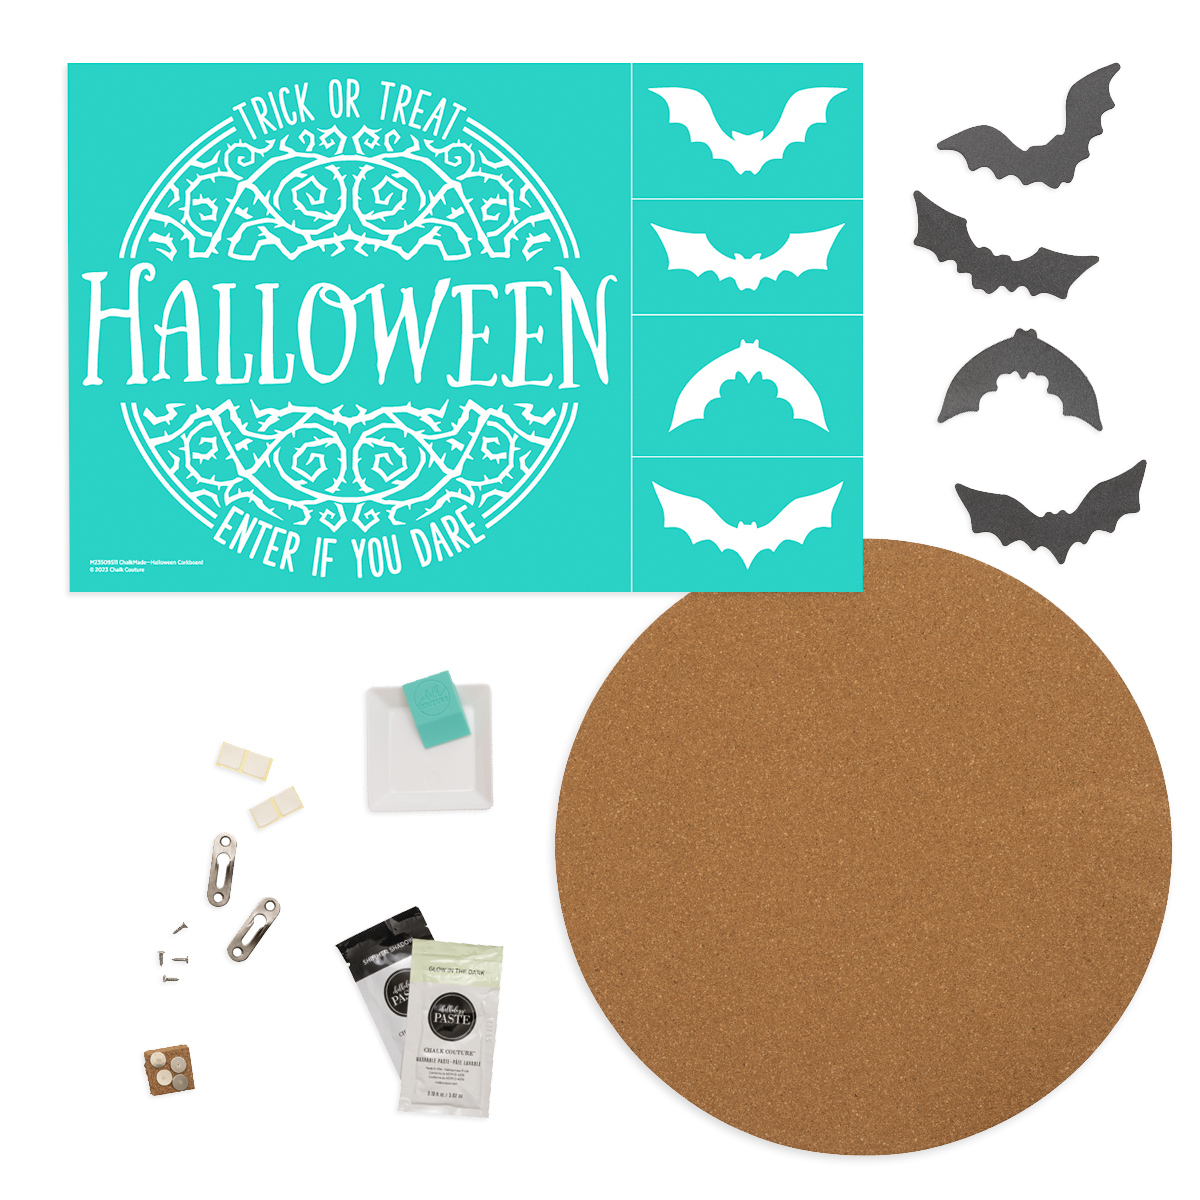 Chalk Couture Halloween Projects: How to Make Quick and Easy DIY Decor